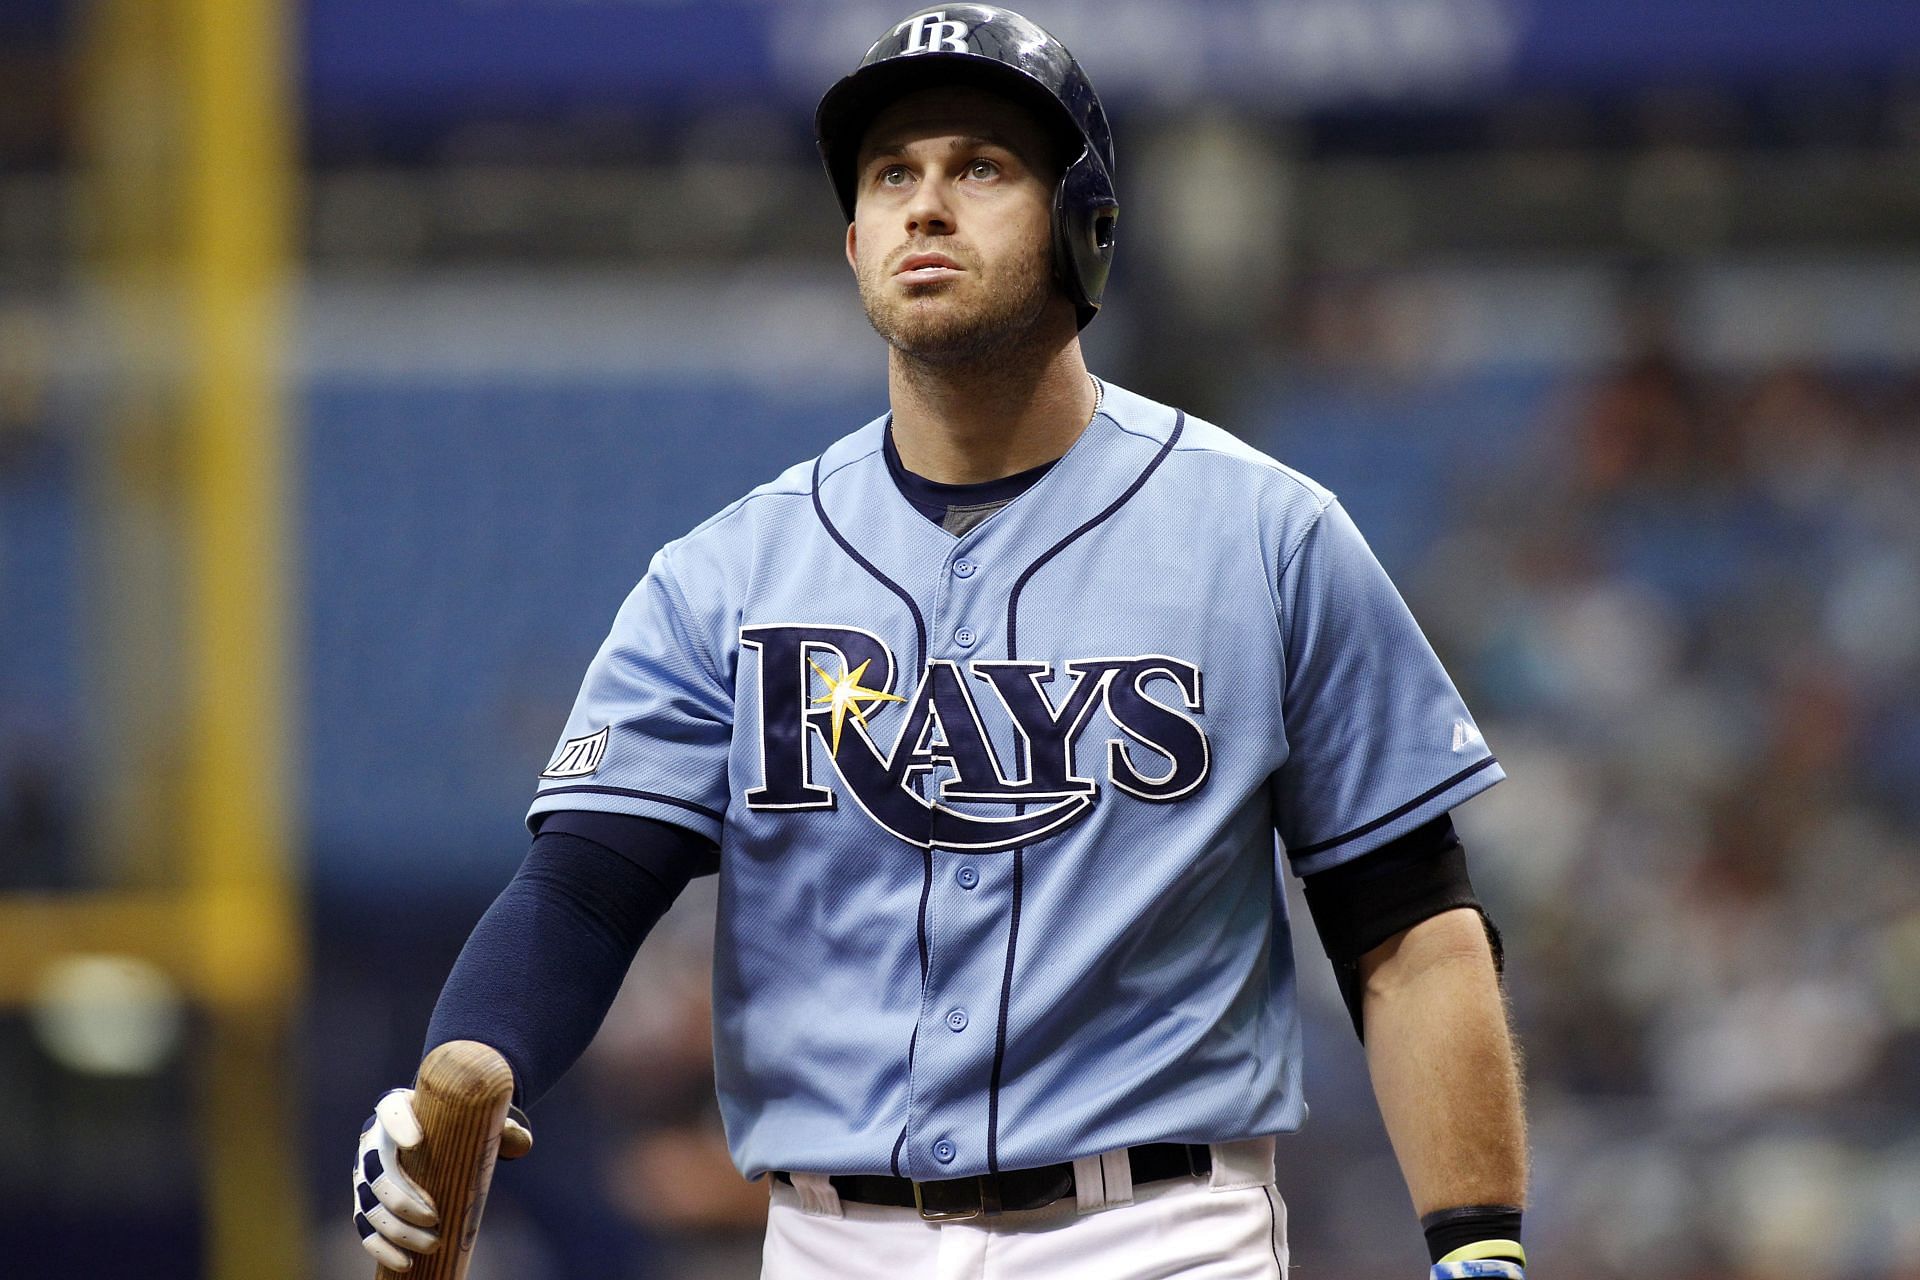 MLB Network - Check out Evan Longoria on Intentional Talk talking